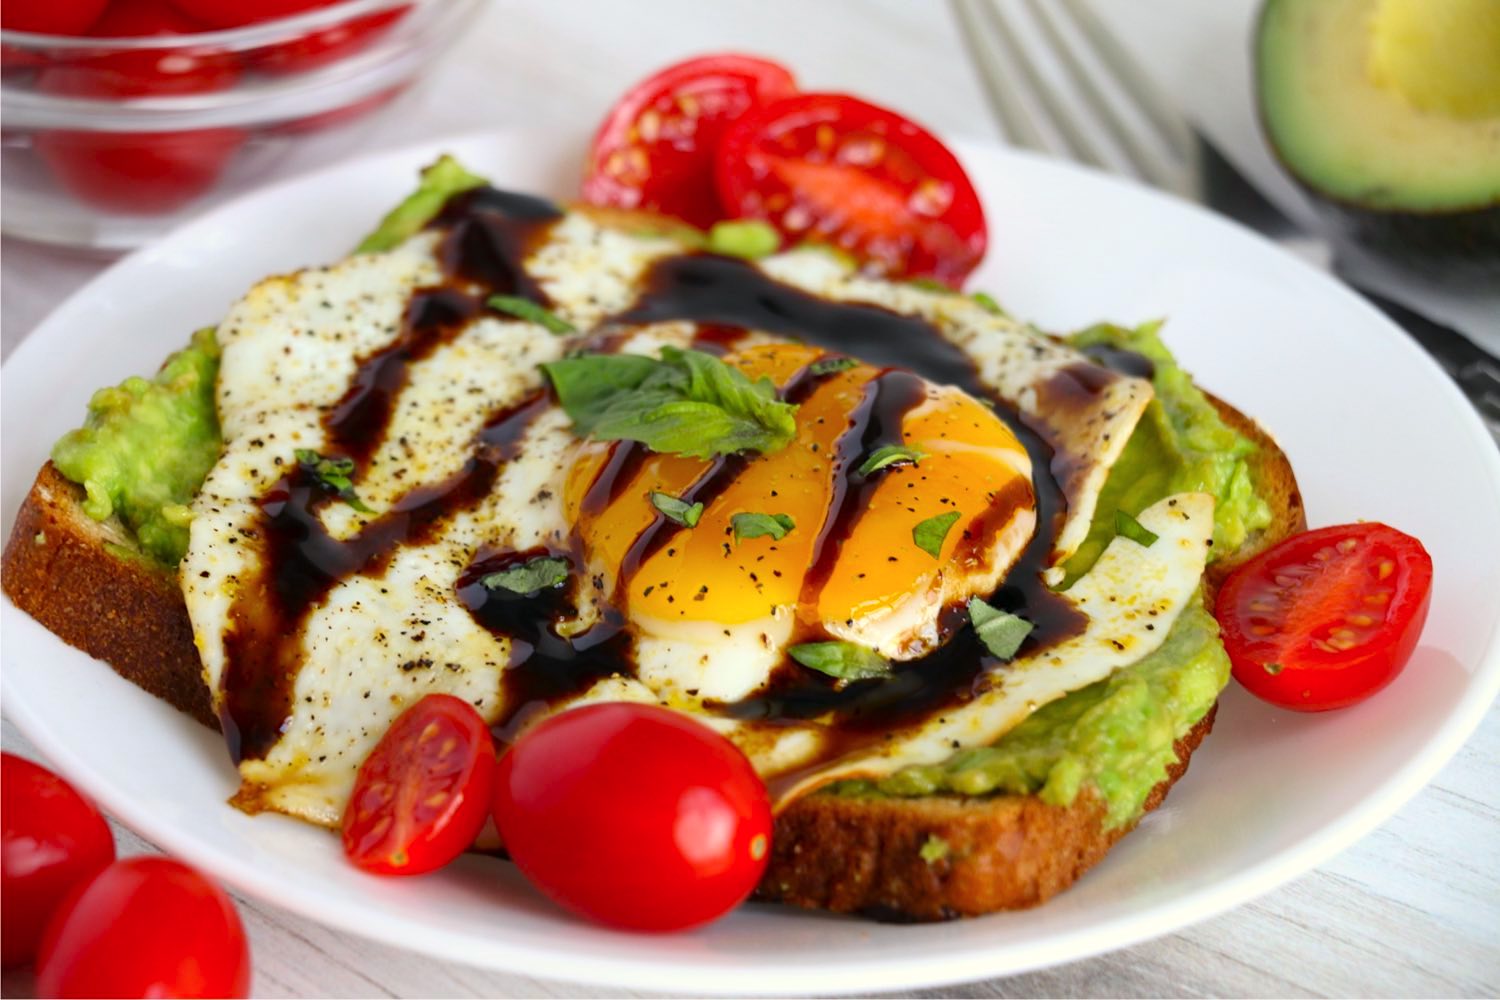 Egg on avocado toast with cherry tomatoes